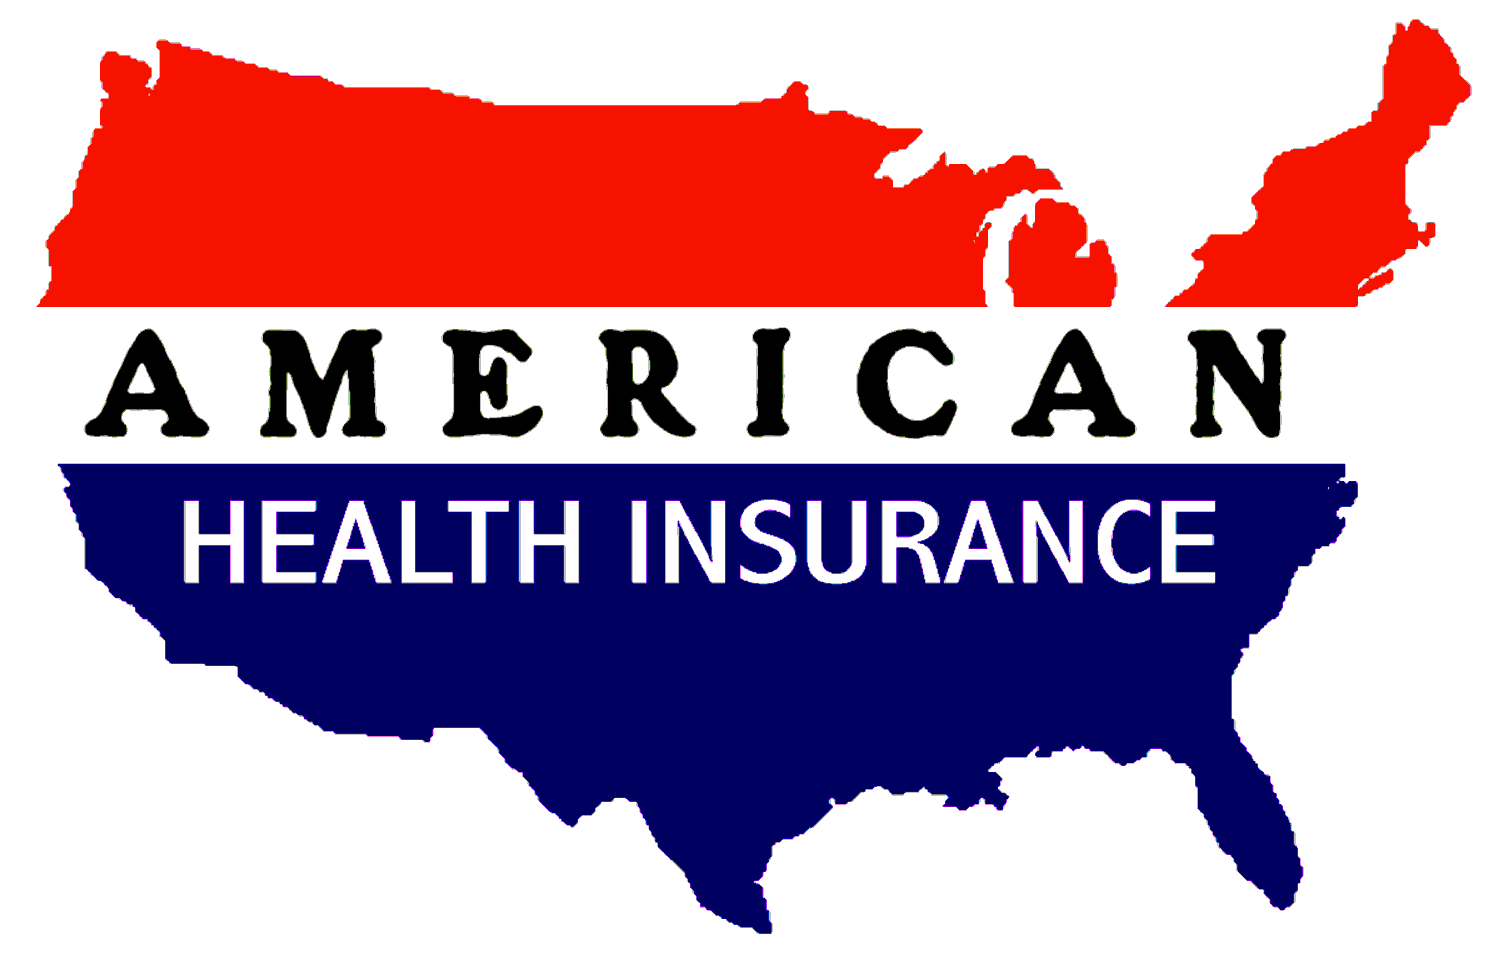 Health Care Insurance Company Logo - Blue Cross - American Health Insurance; Special Health Plans for 18 ...